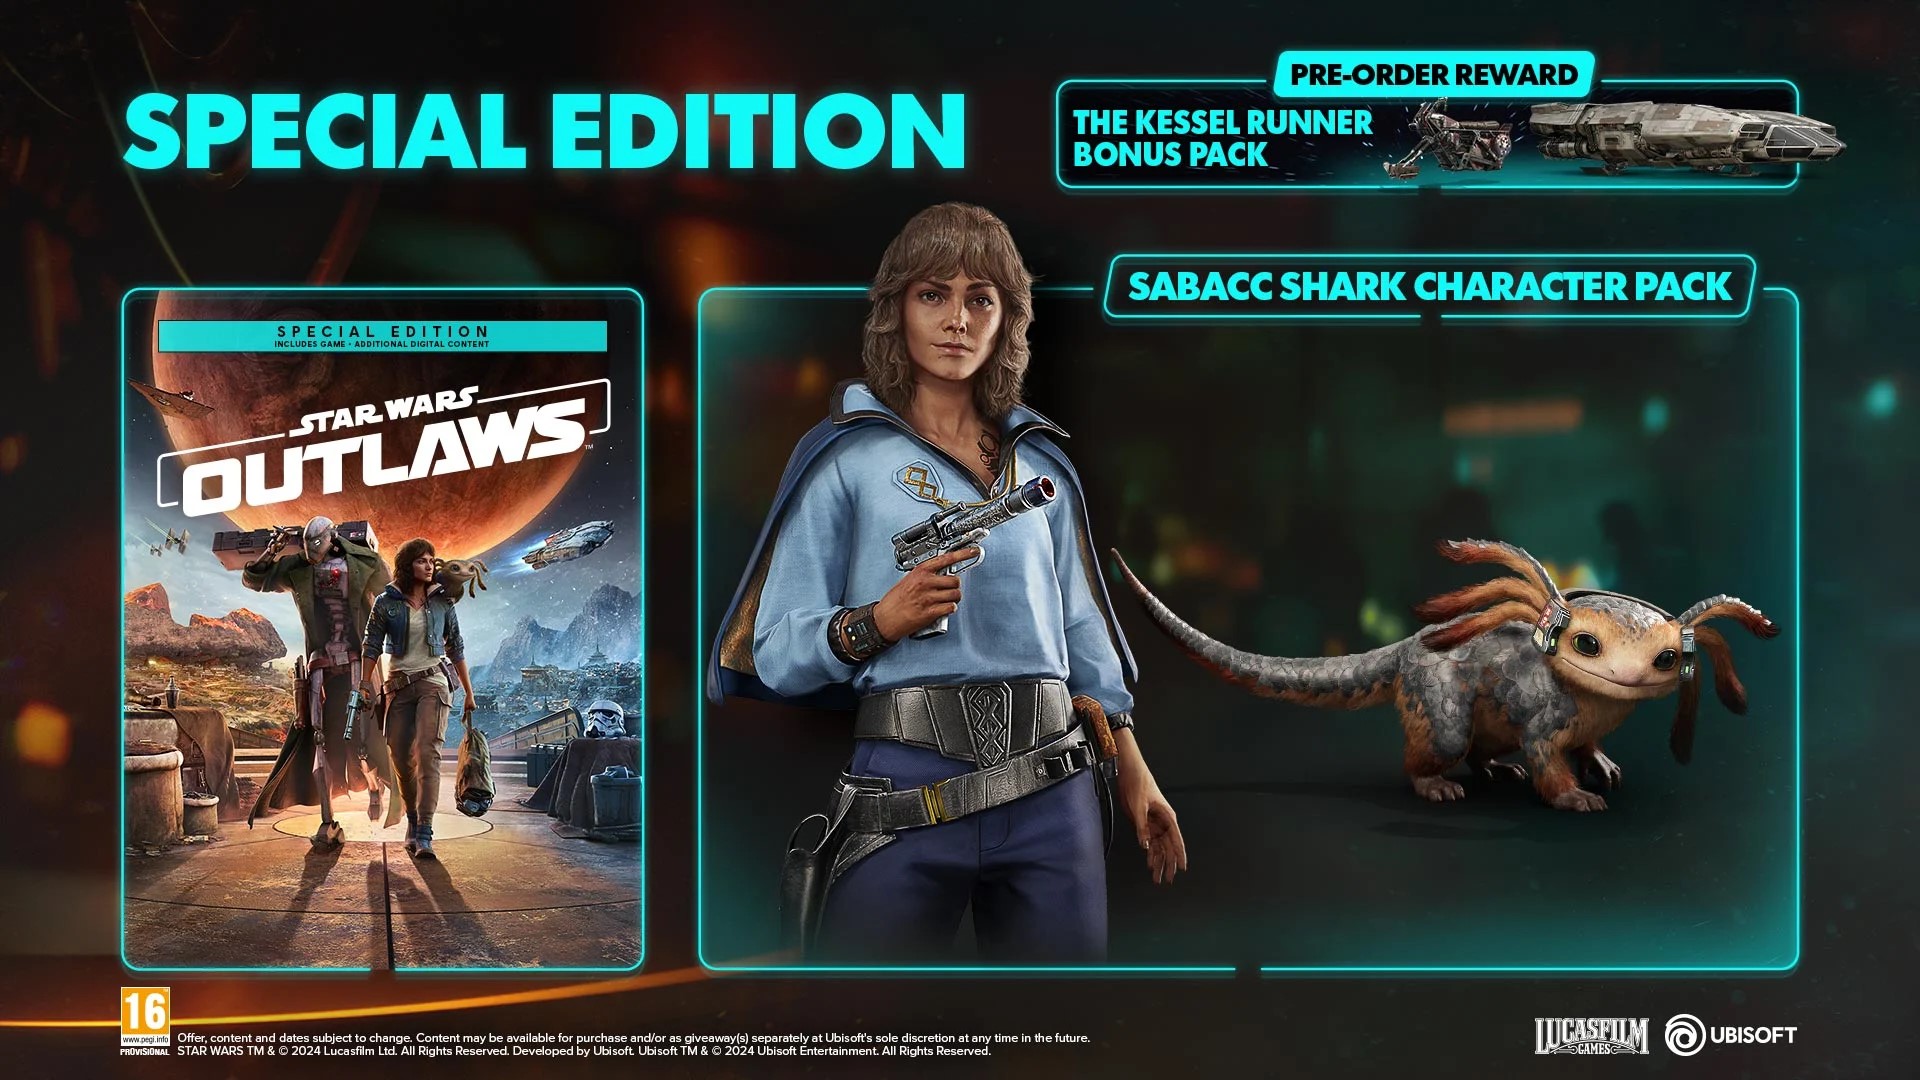 The bonuses of a Special Edition Star Wars Outlaw pre-order